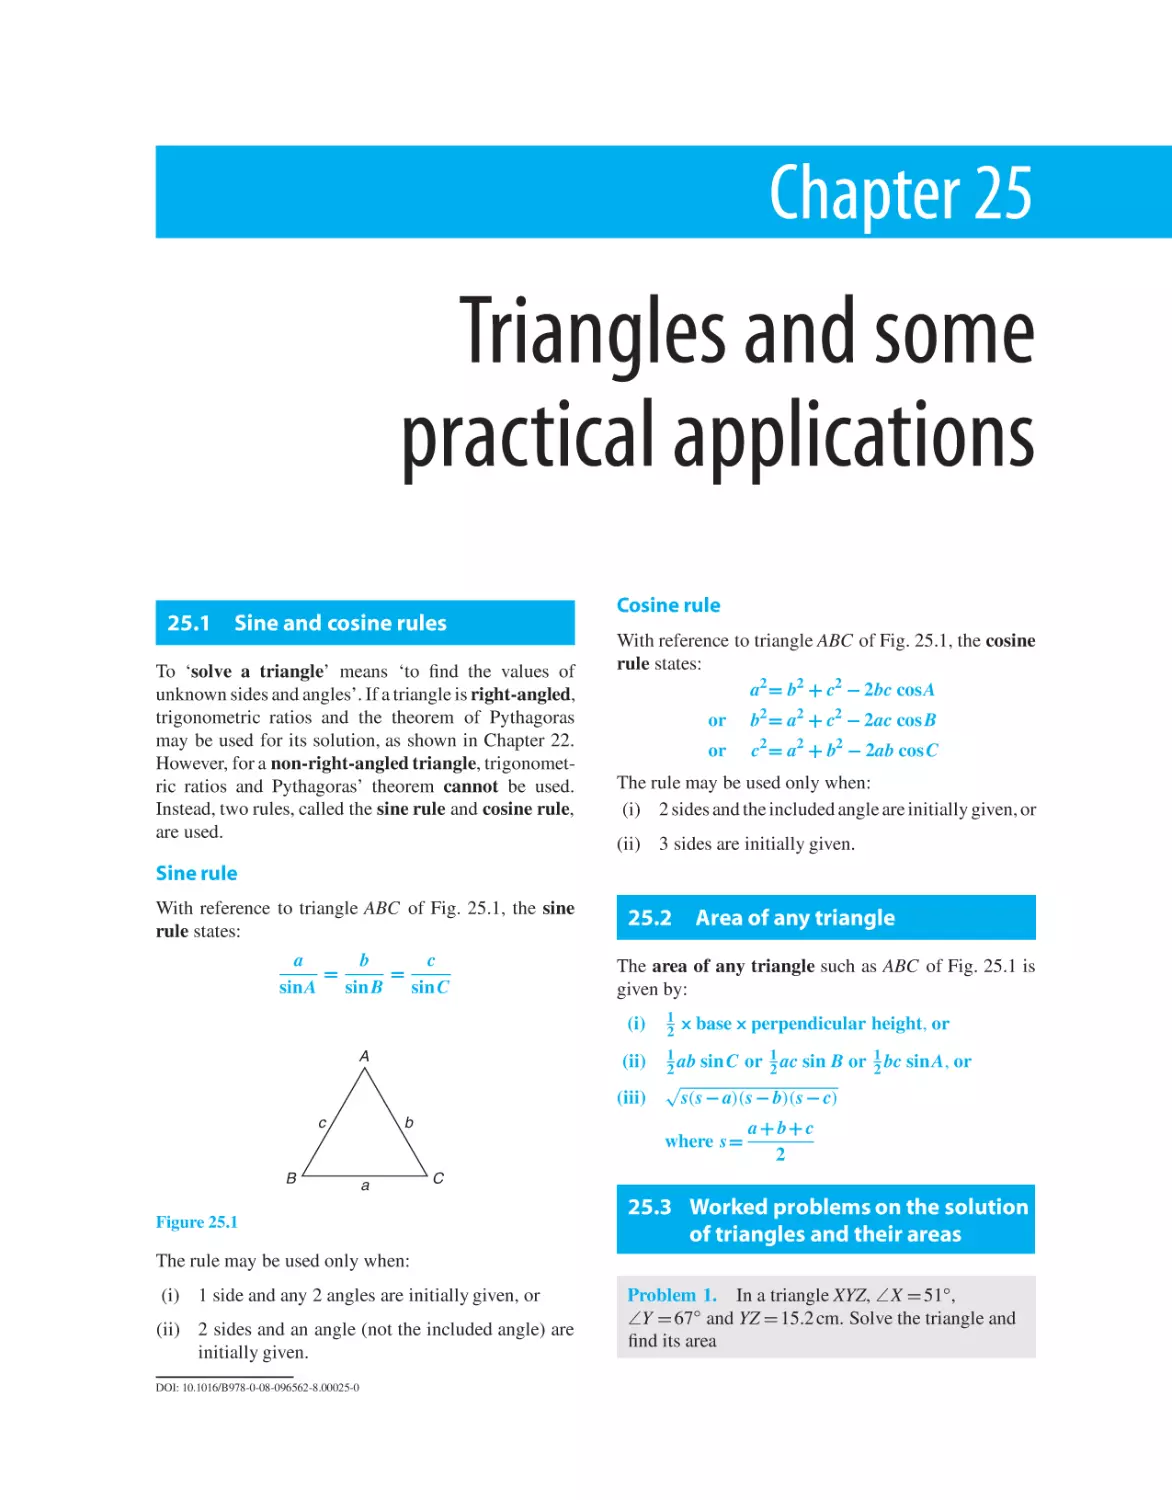 Chapter 25. Triangles and some practical applications
25.1 Sine and cosine rules
25.2 Area of any triangle
25.3 Worked problems on the solution of triangles and their areas